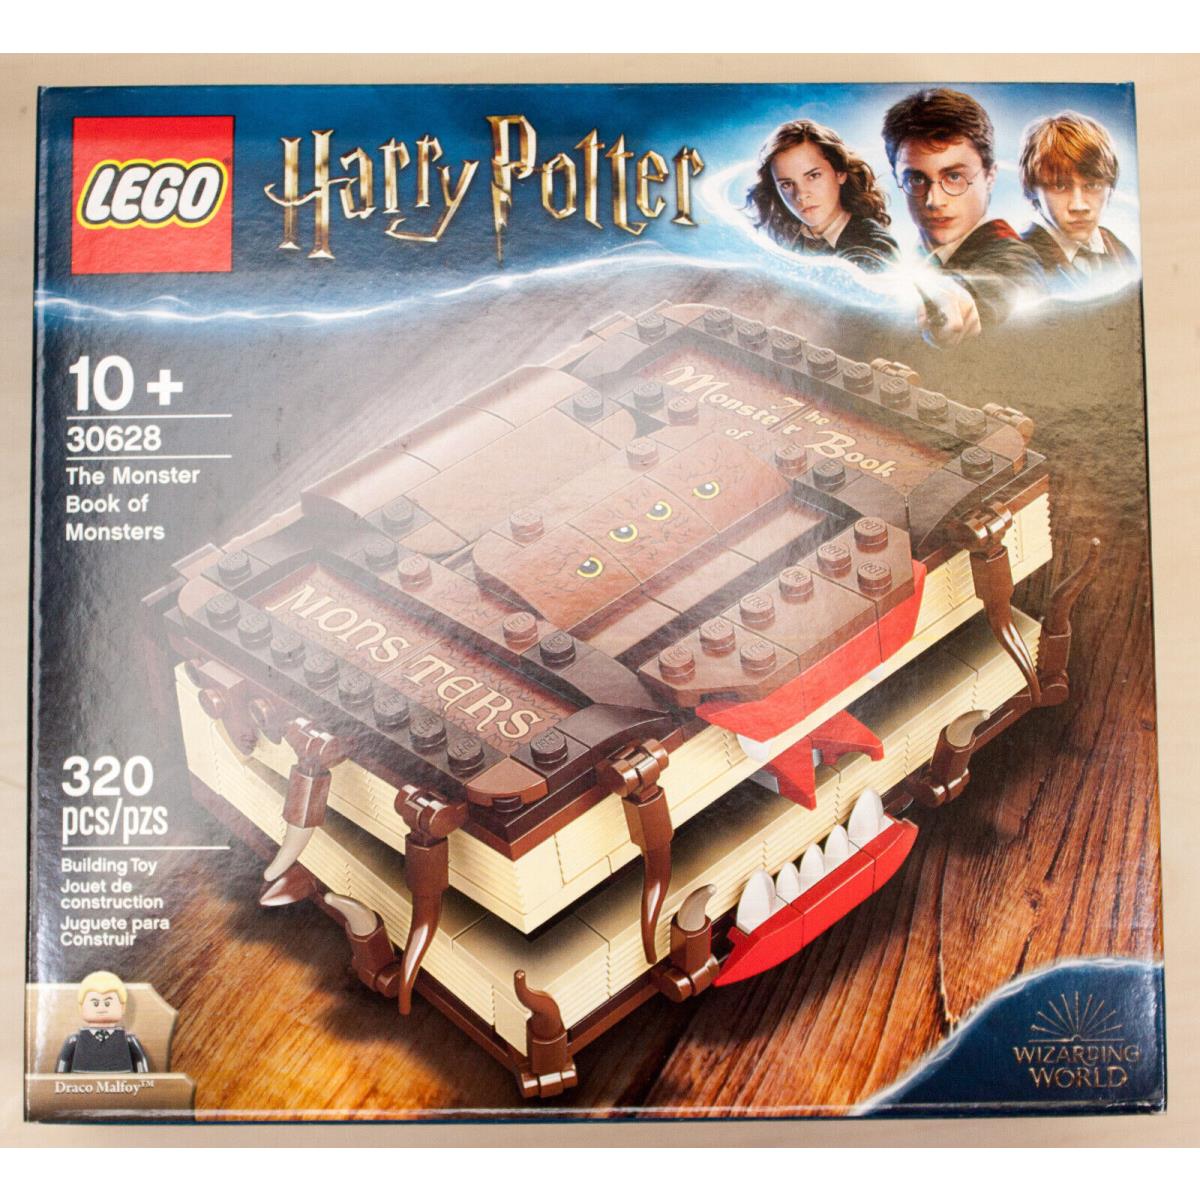 Lego Harry Potter Book of Monsters 30628 Box